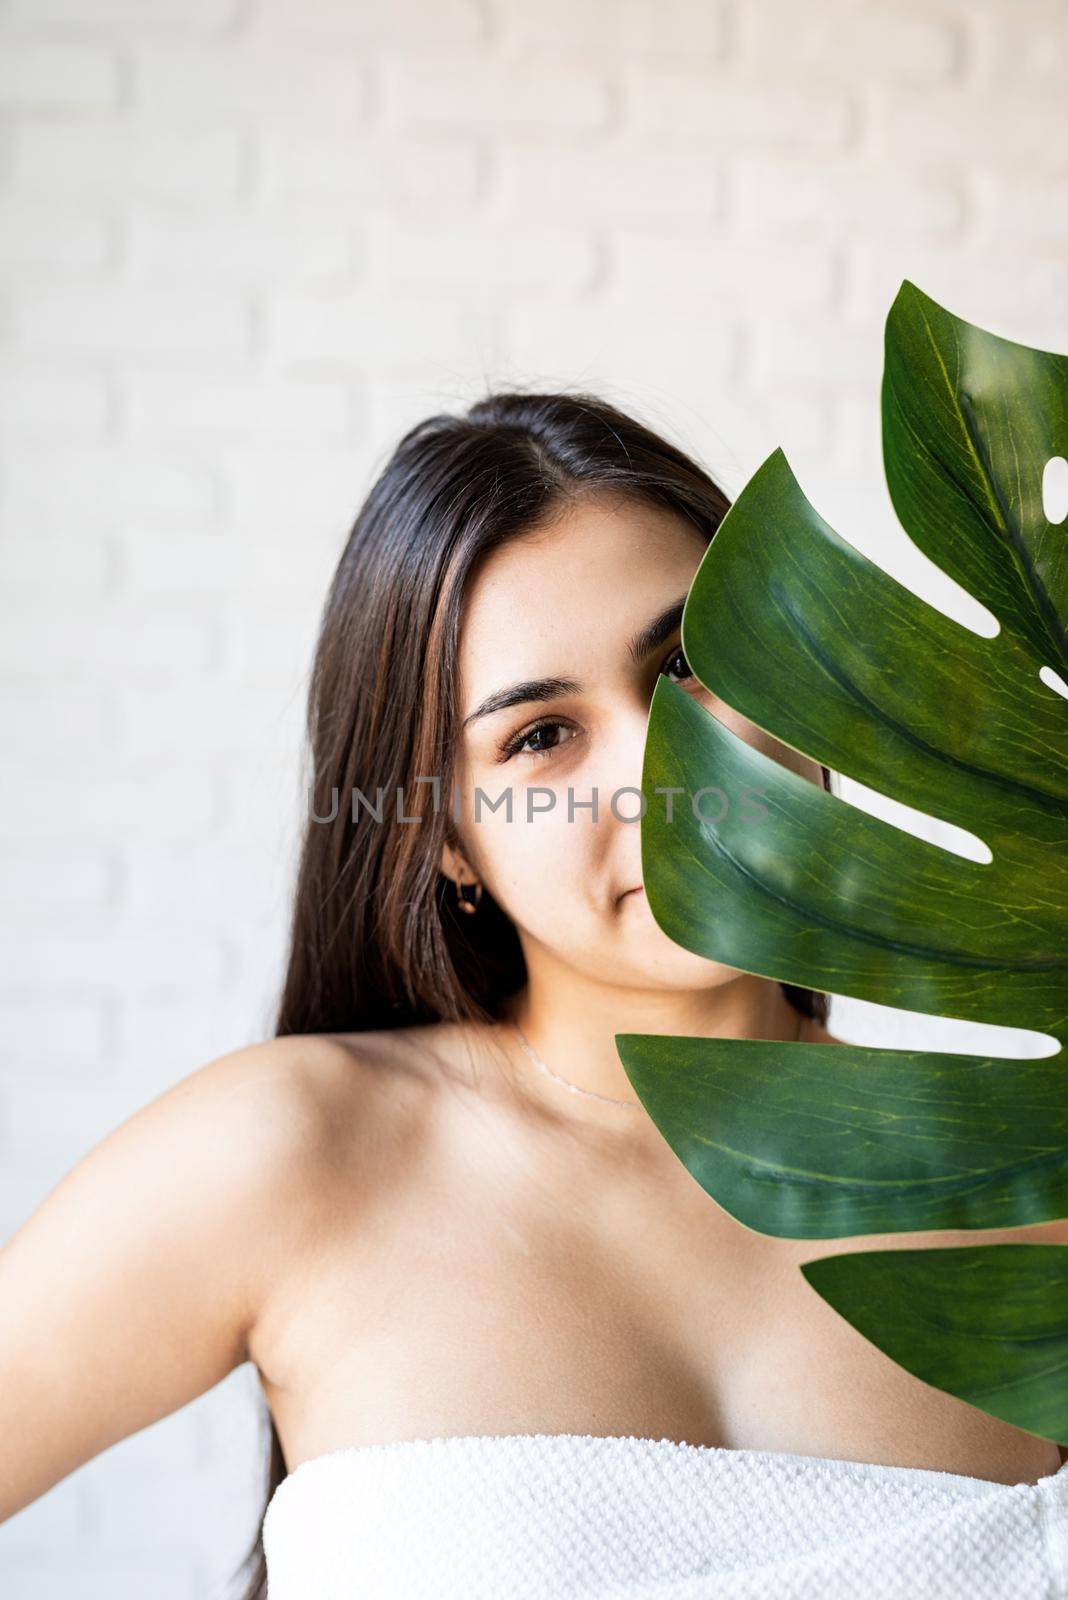 Spa Facial Mask. Spa and beauty. Happy beautiful brunette woman wearing bath towels holding a green monstera leaf in front of her face